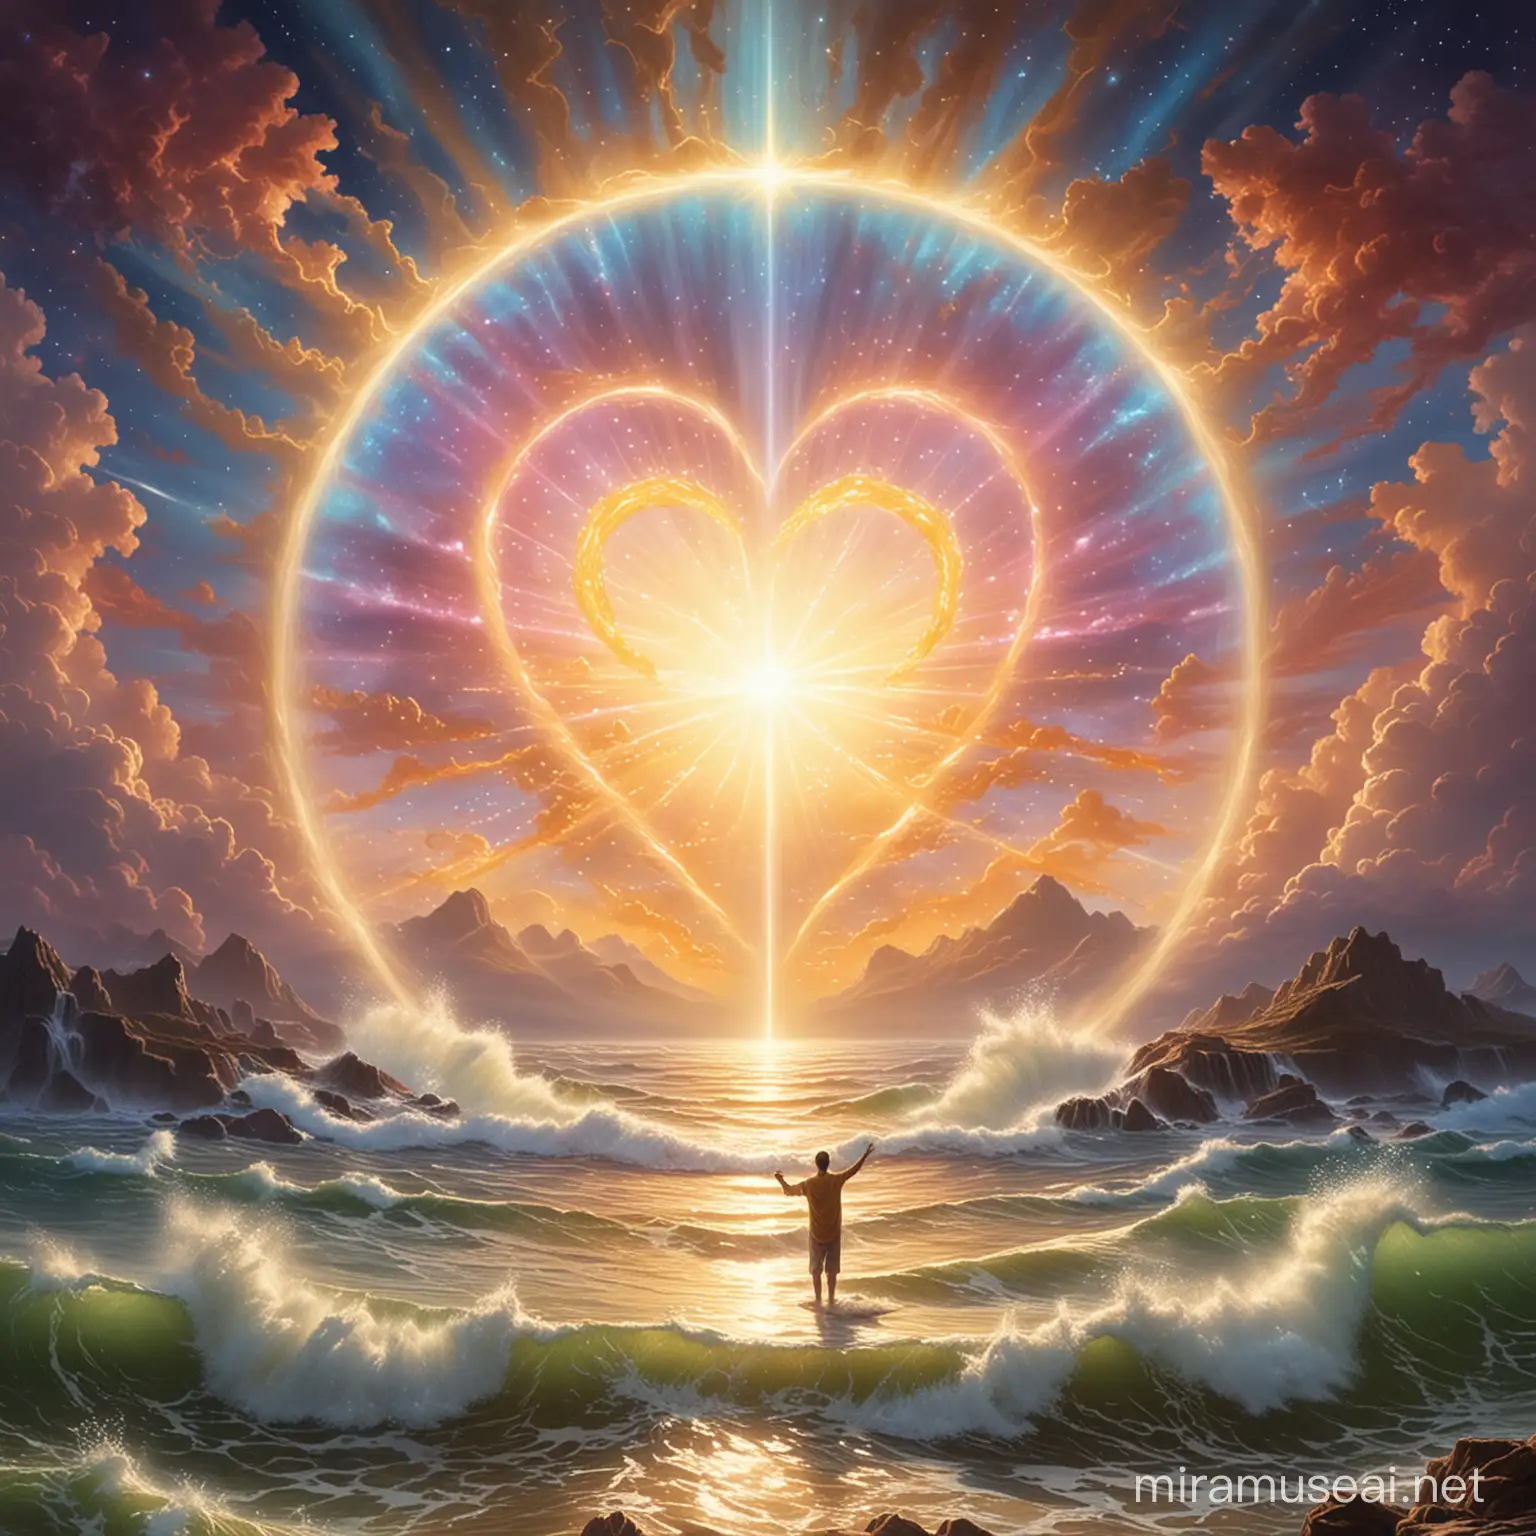 Image a picture of God sending out a stream of illuminated life giving Love from the center of his universal being permeating everything, the carrierwave of Life